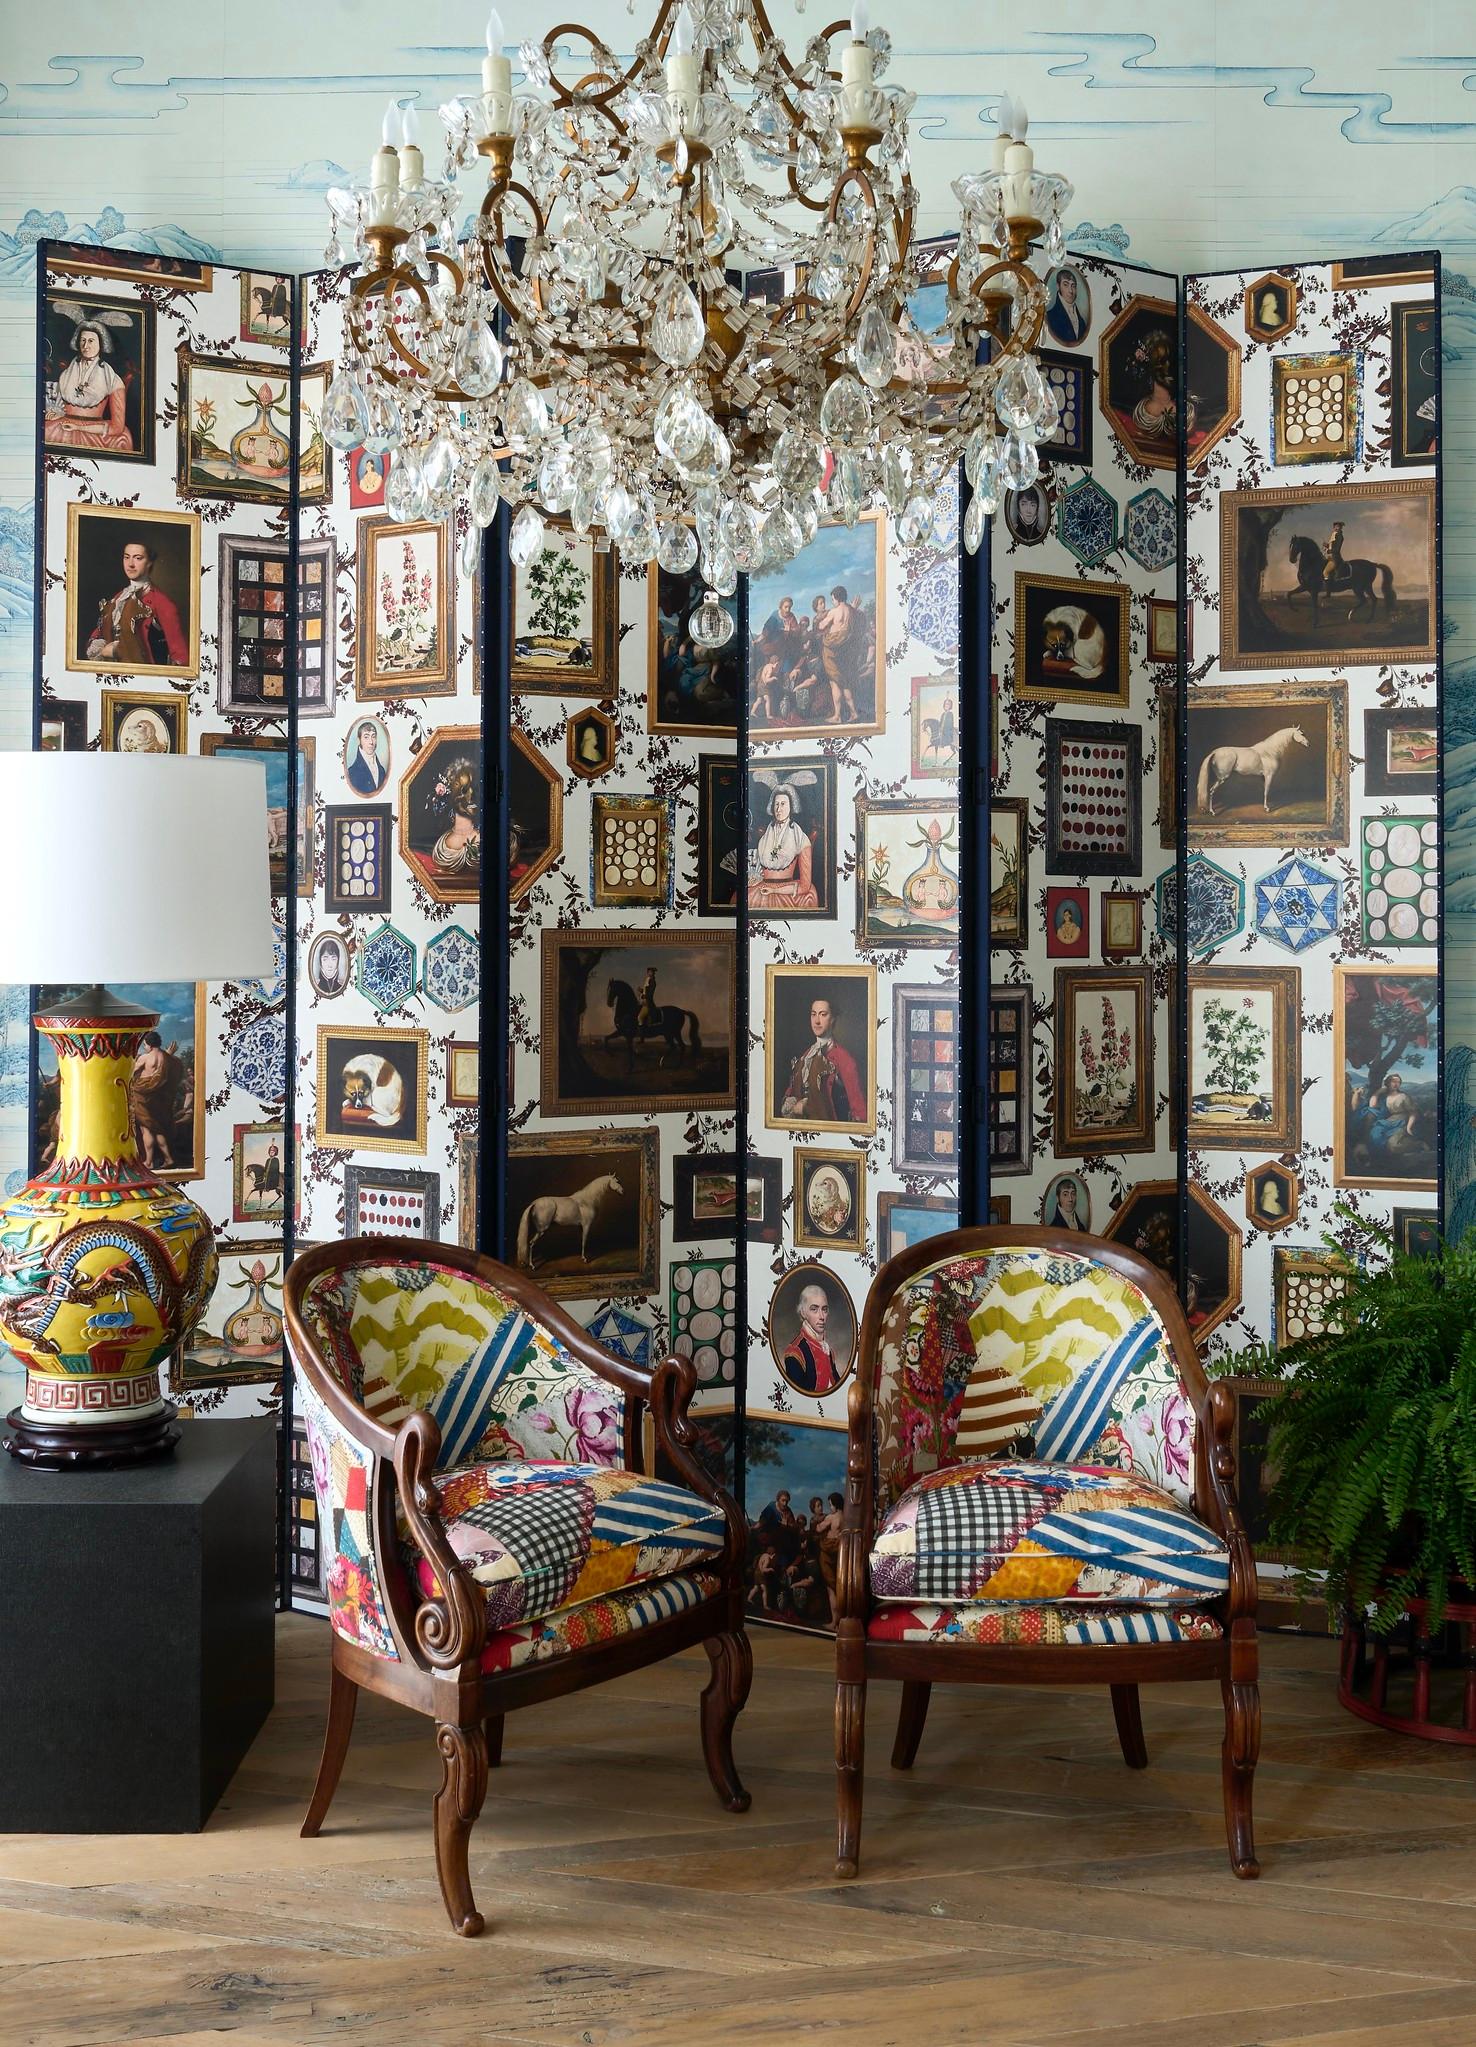 Custom six panel screen with Johnson Hartig of Libertine Le Grand Tour Floral Wallpaper (reverse side Architecture Teal Wallpaper) by Schumacher. Each panel inspired by an eclectic mix of antique paintings and collectibles with hand applied navy